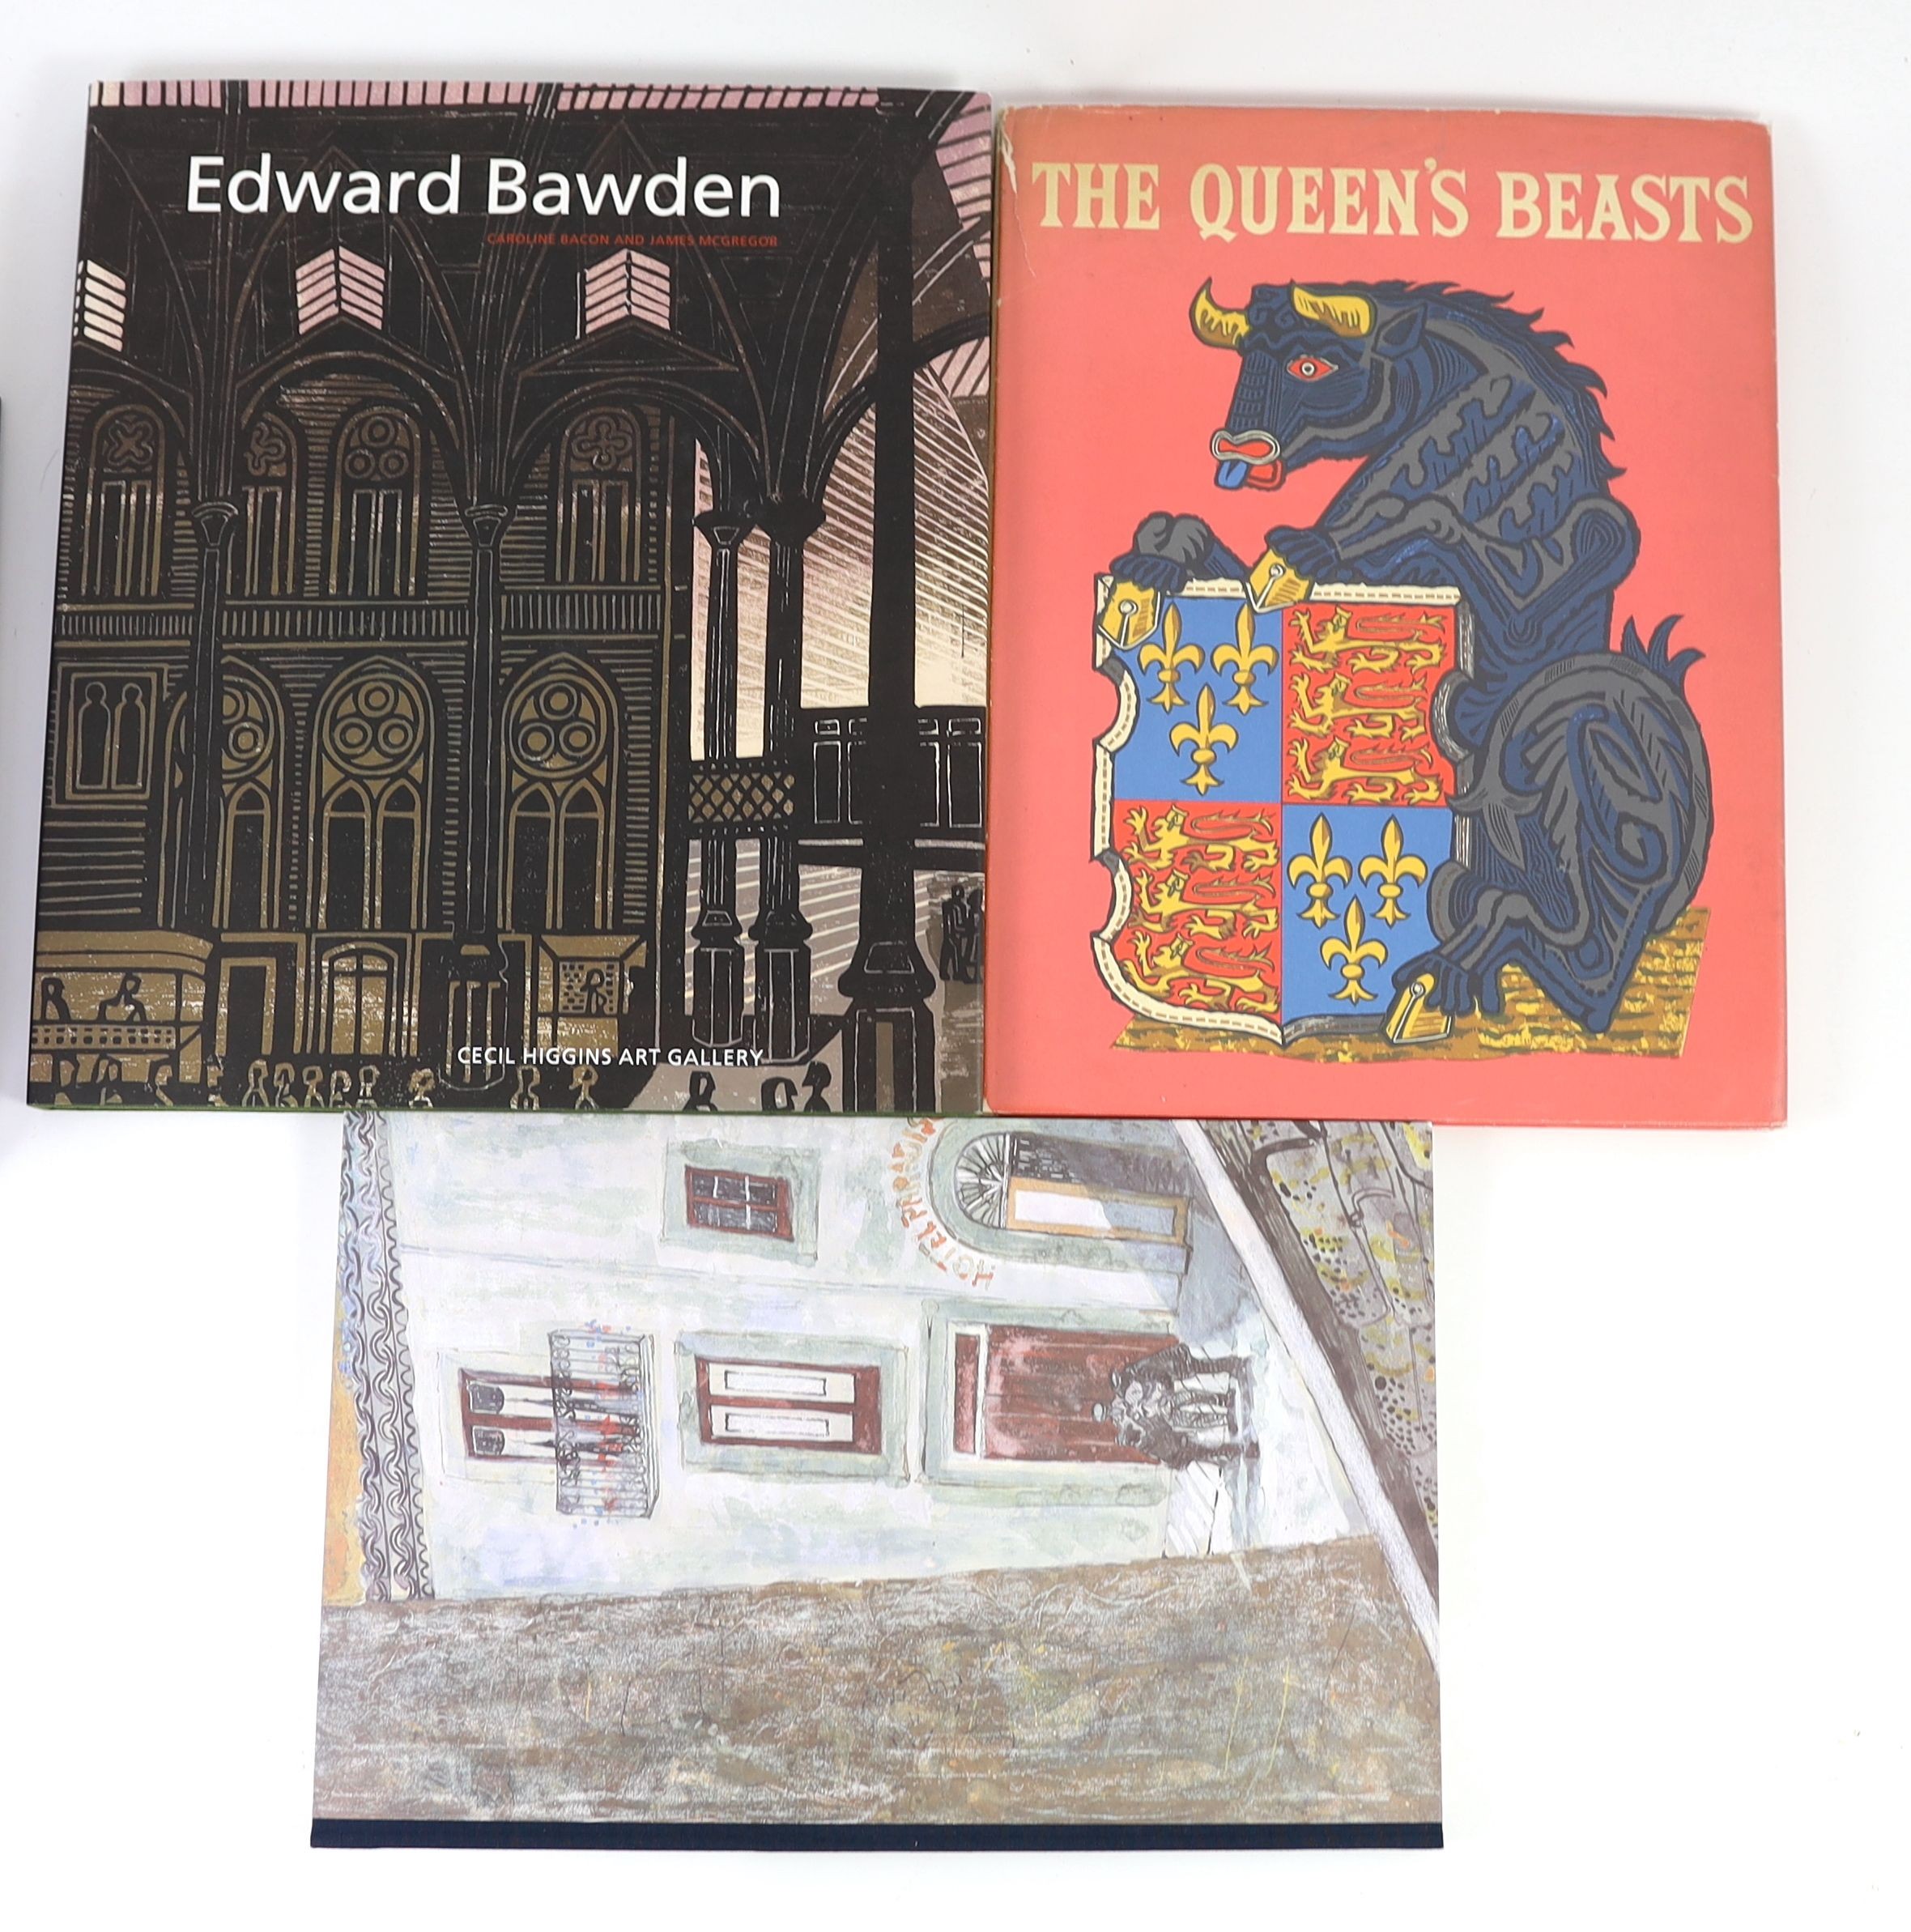 Bawden, Edward - 12 works, about or Illustrated by:- Weaver, Nigel - Edward Bawden In the Middle East, 2008; The Queen’s Beasts, 1953; Bacon, Caroline and McGregor, James - Edward Bawden, one of 2000, 2008; Hoyle, Walter